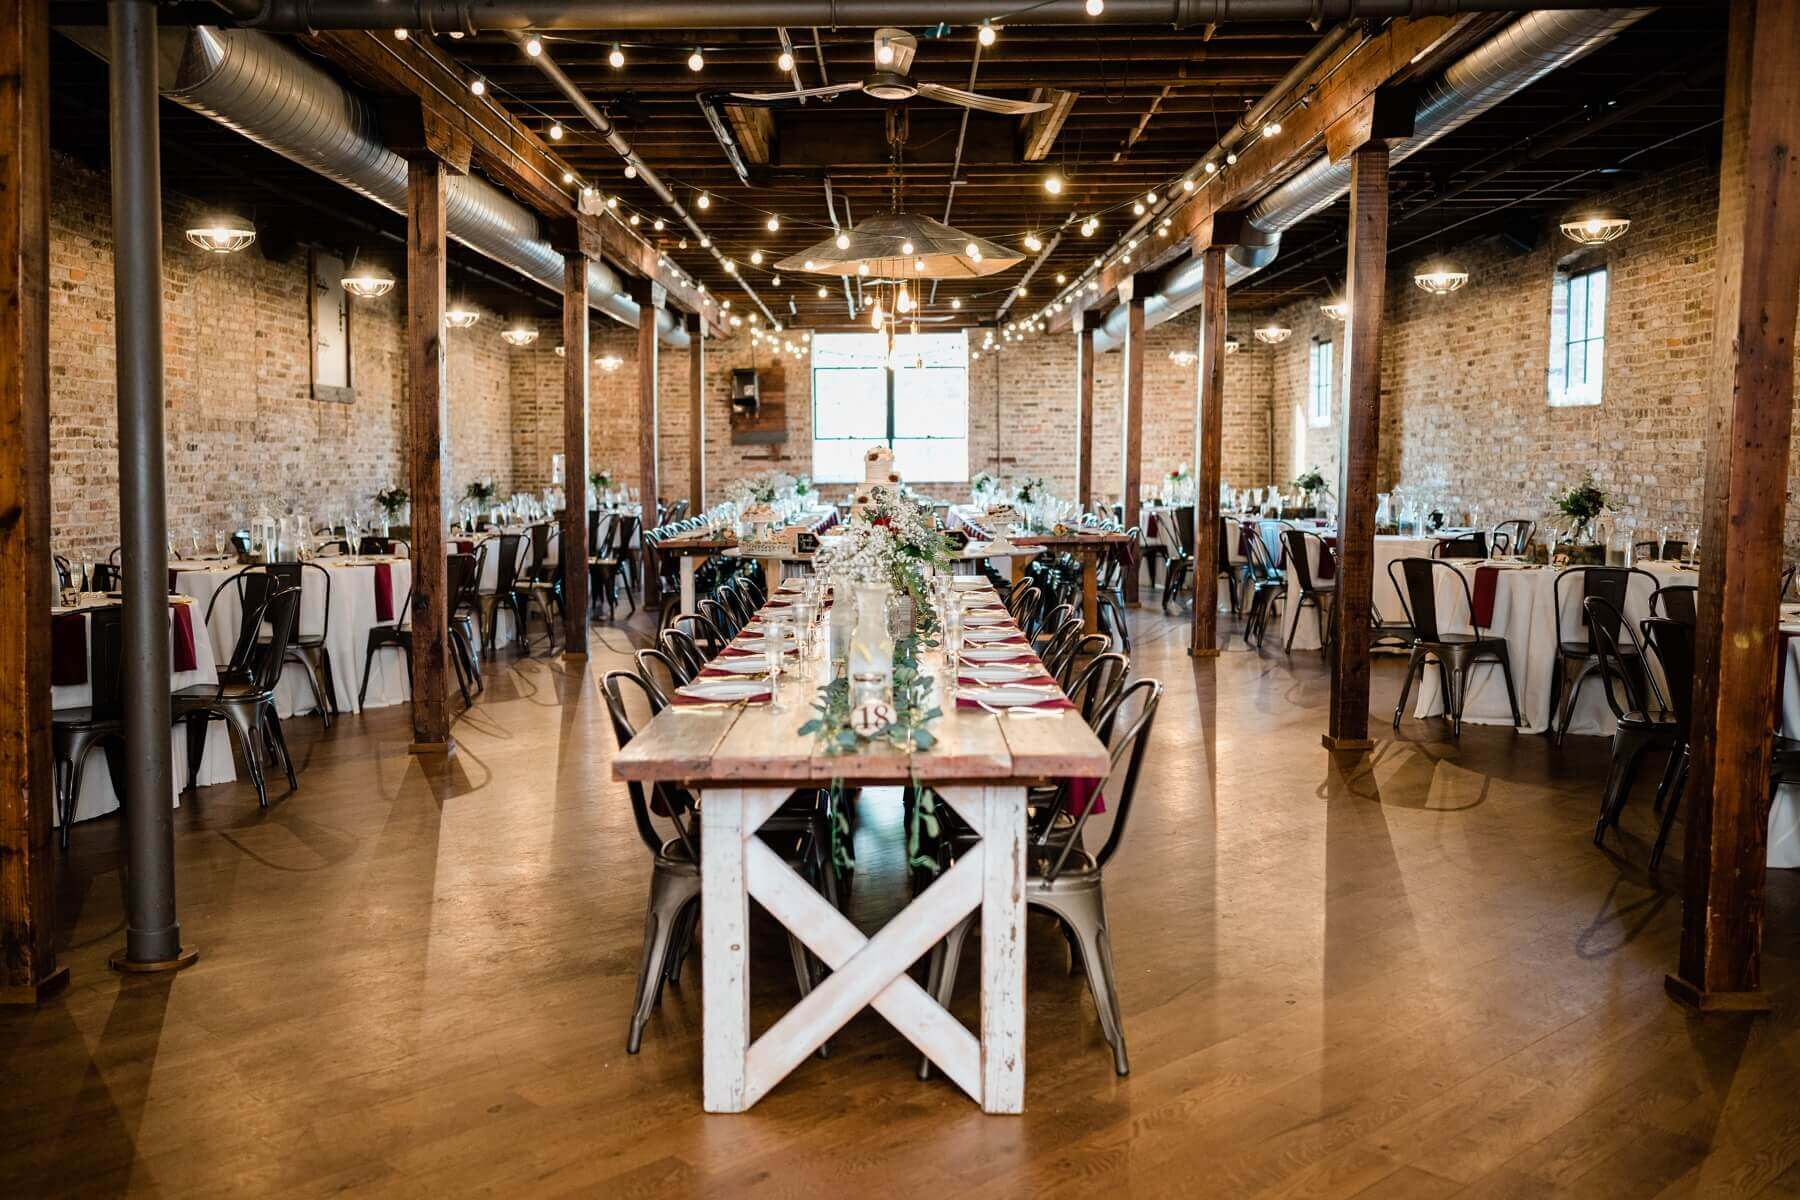 Rustic wedding reception including farmhouse tables, metal chairs, and rustic wood boxes with red and white flowers